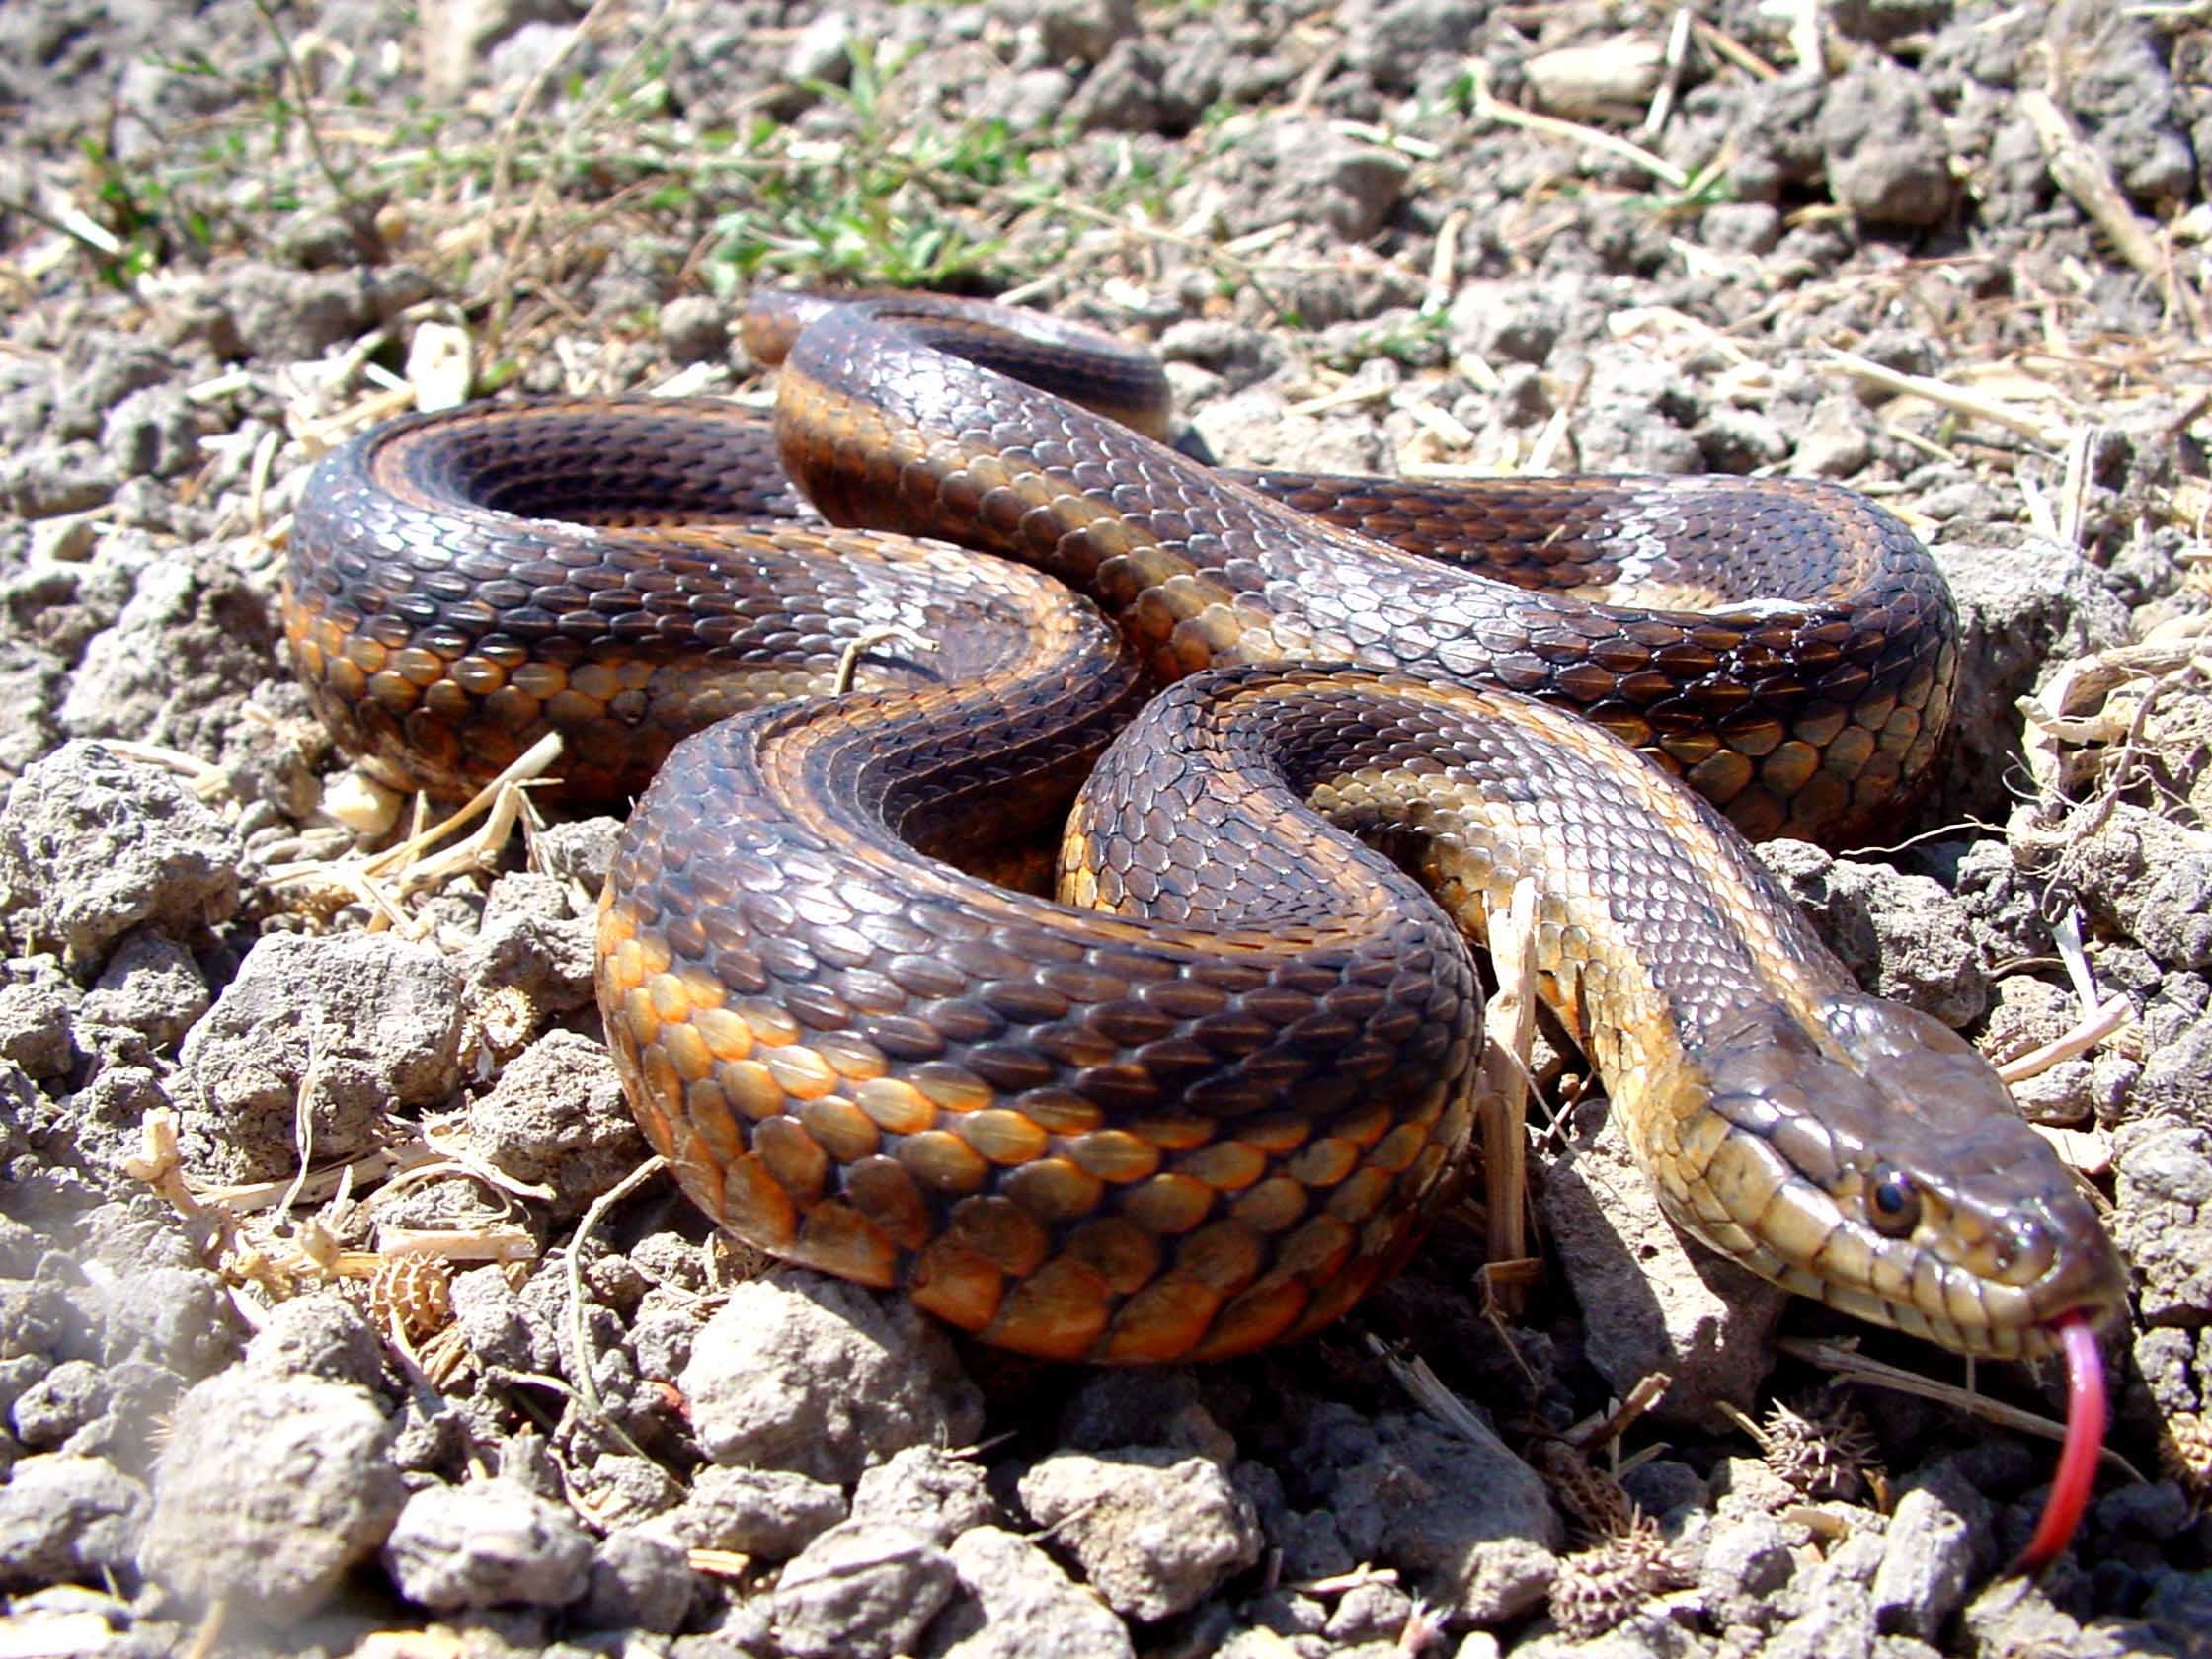 The giant garter snake is listed as a threatened species at the state and federal levels. It depends on water both to find meals and avoid becoming one. (Eric C. Hansen/CA Department of Fish and Wildlife)